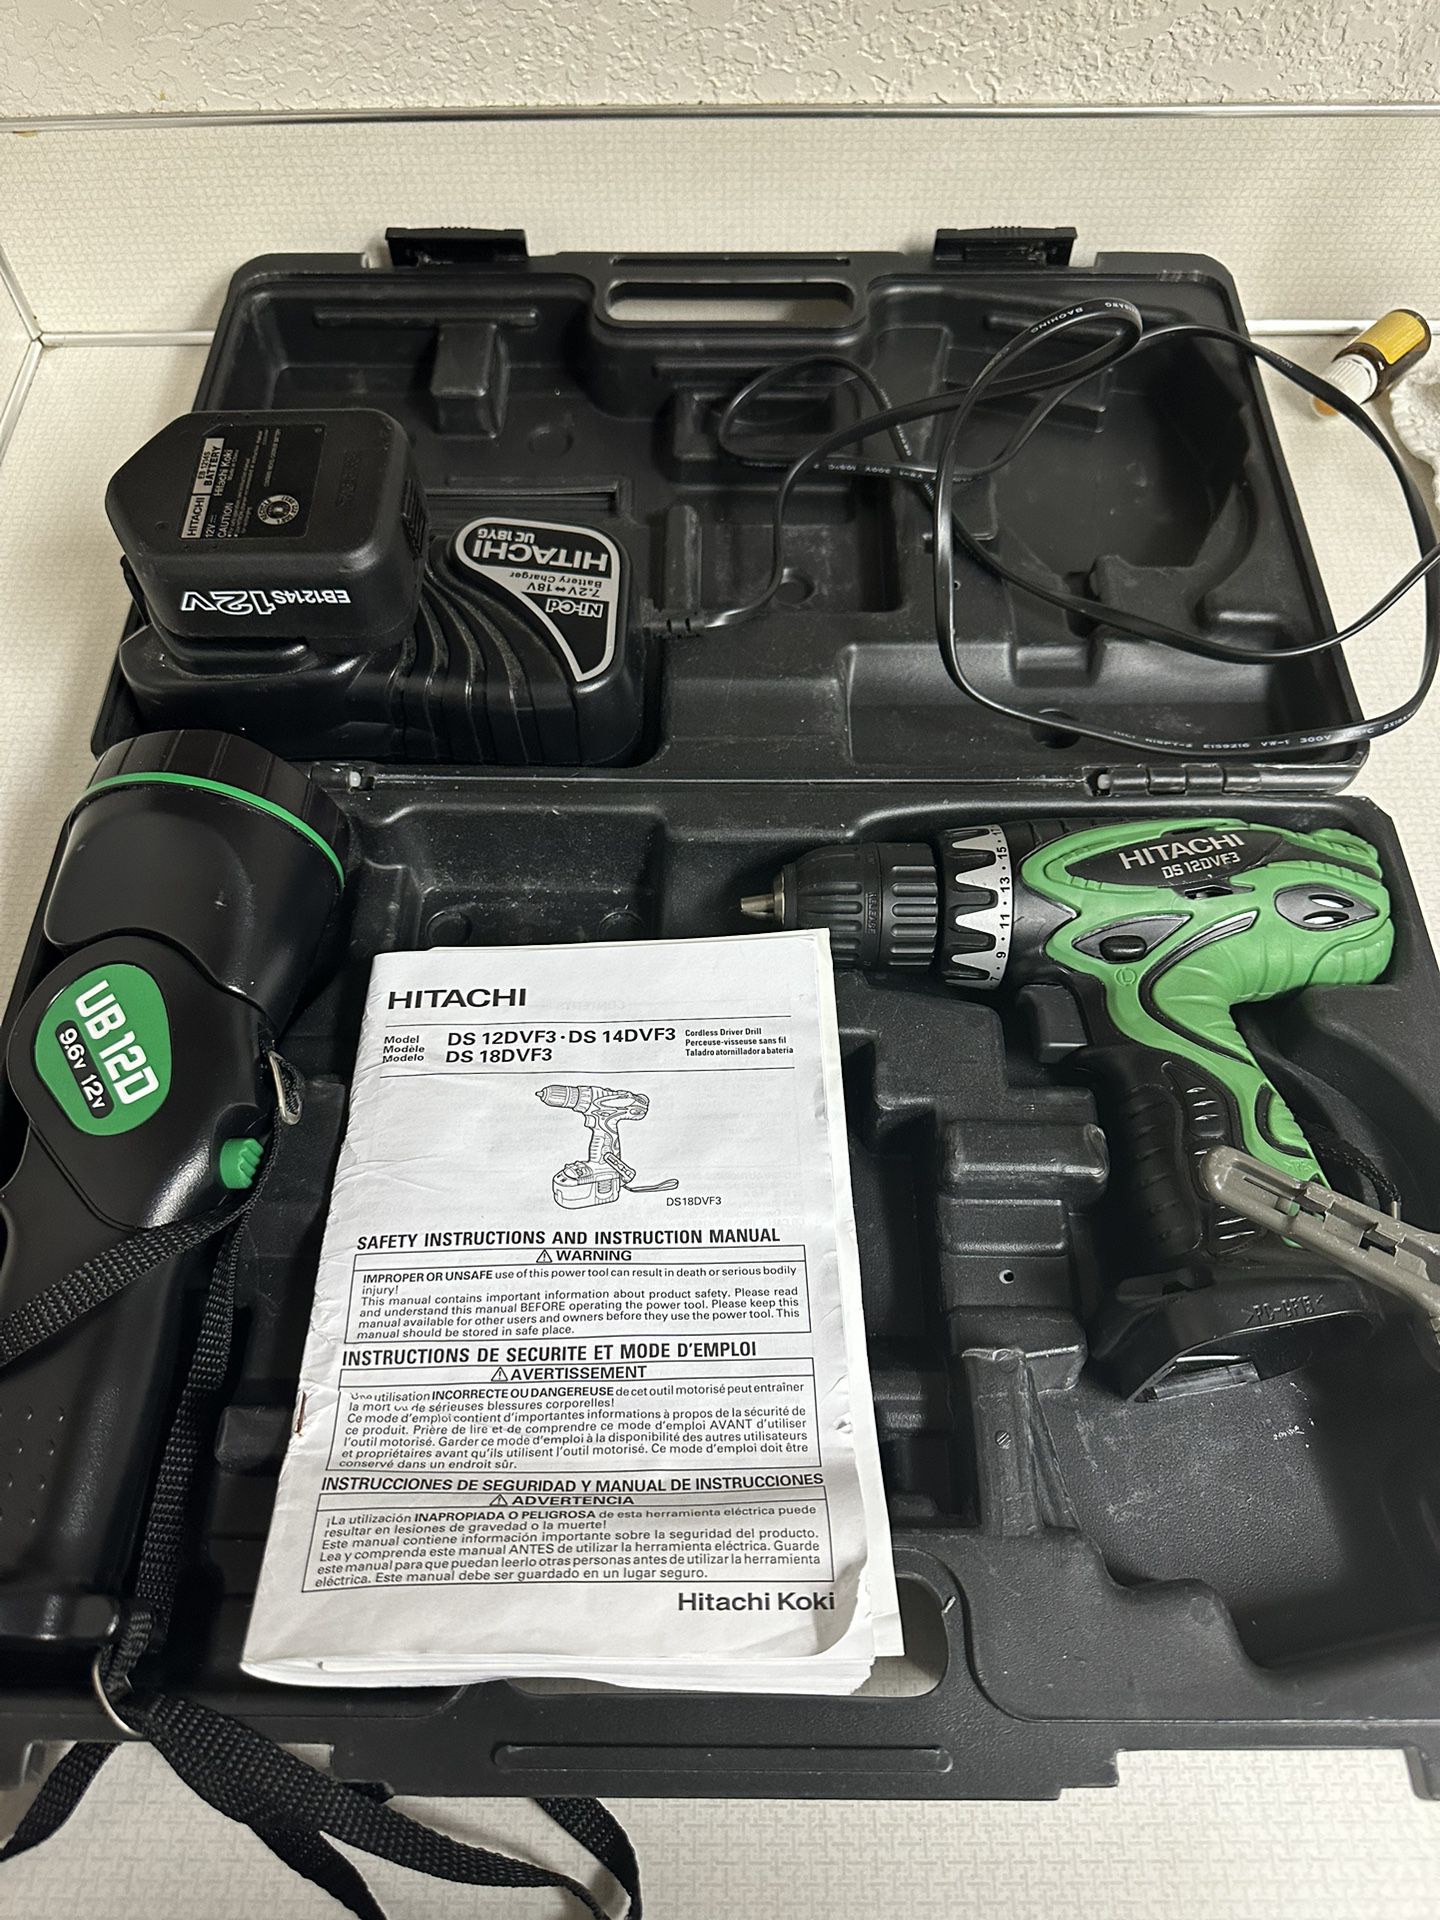 Hitachi DS12DVF3 12 V Cordless 3/8" Drill Driver w/Charger, Battery and Box